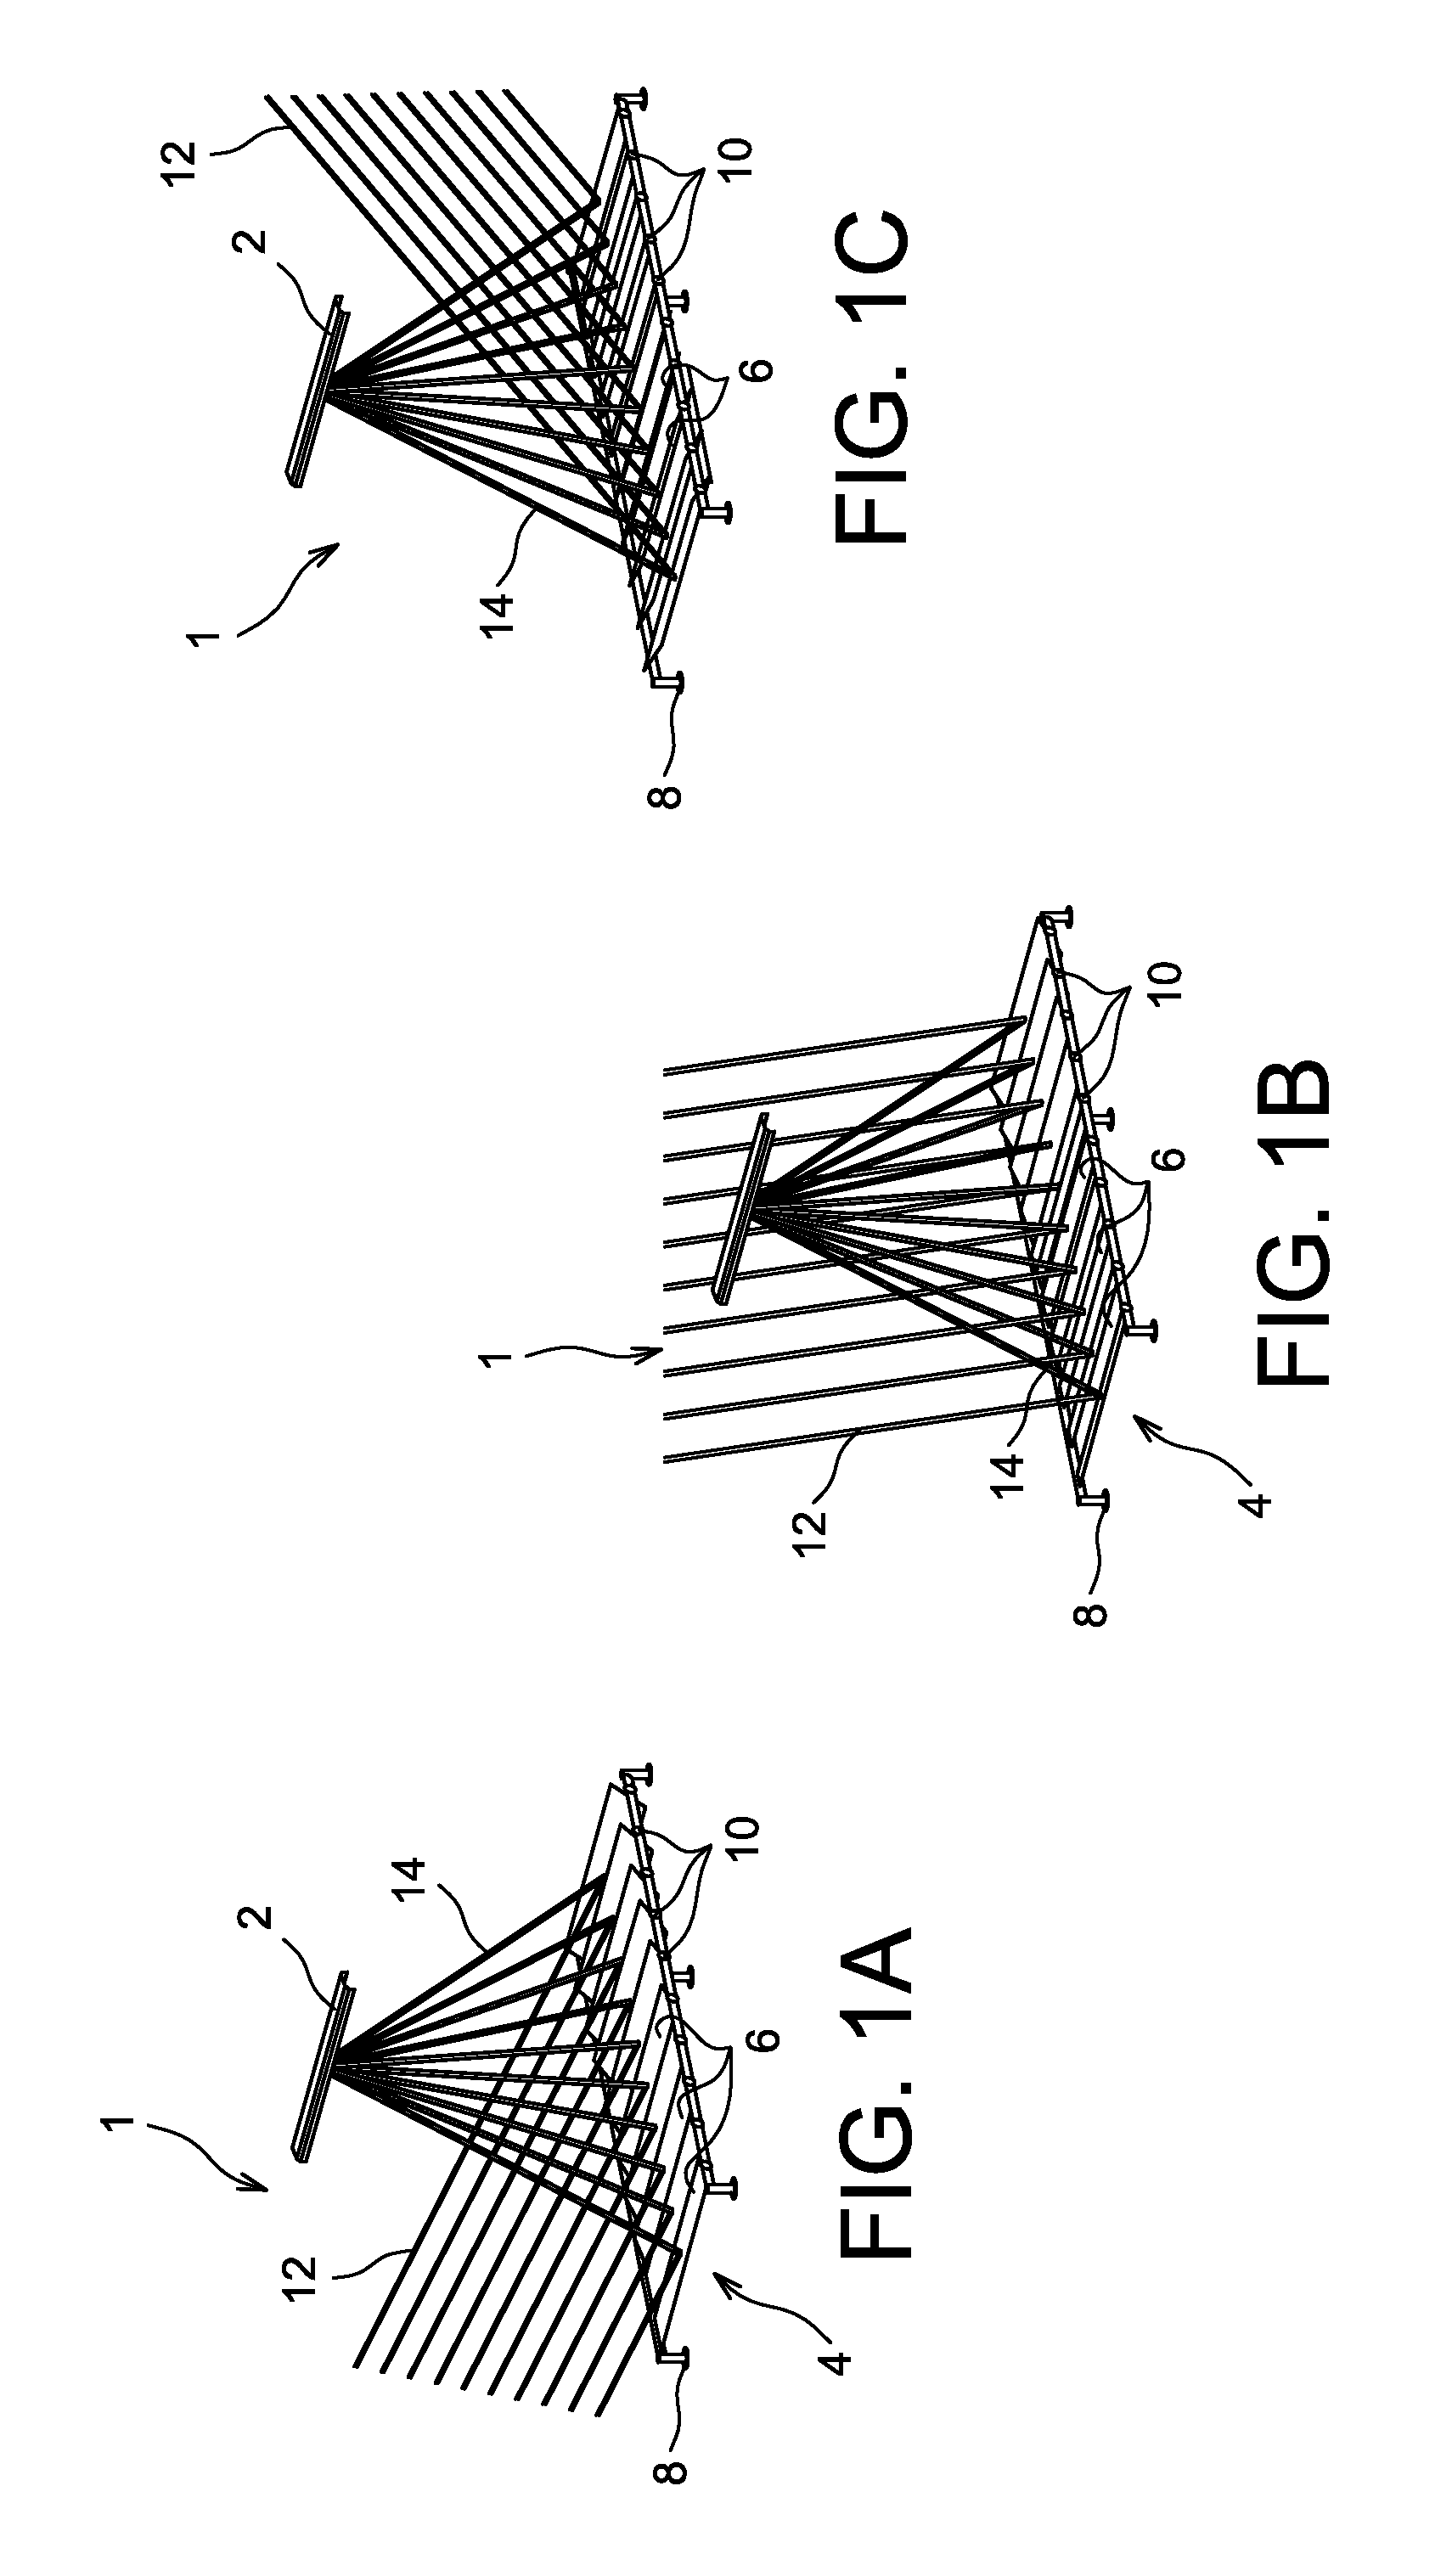 Method for Manufacturing a Reflector, Preferably for the Solar Energy Field